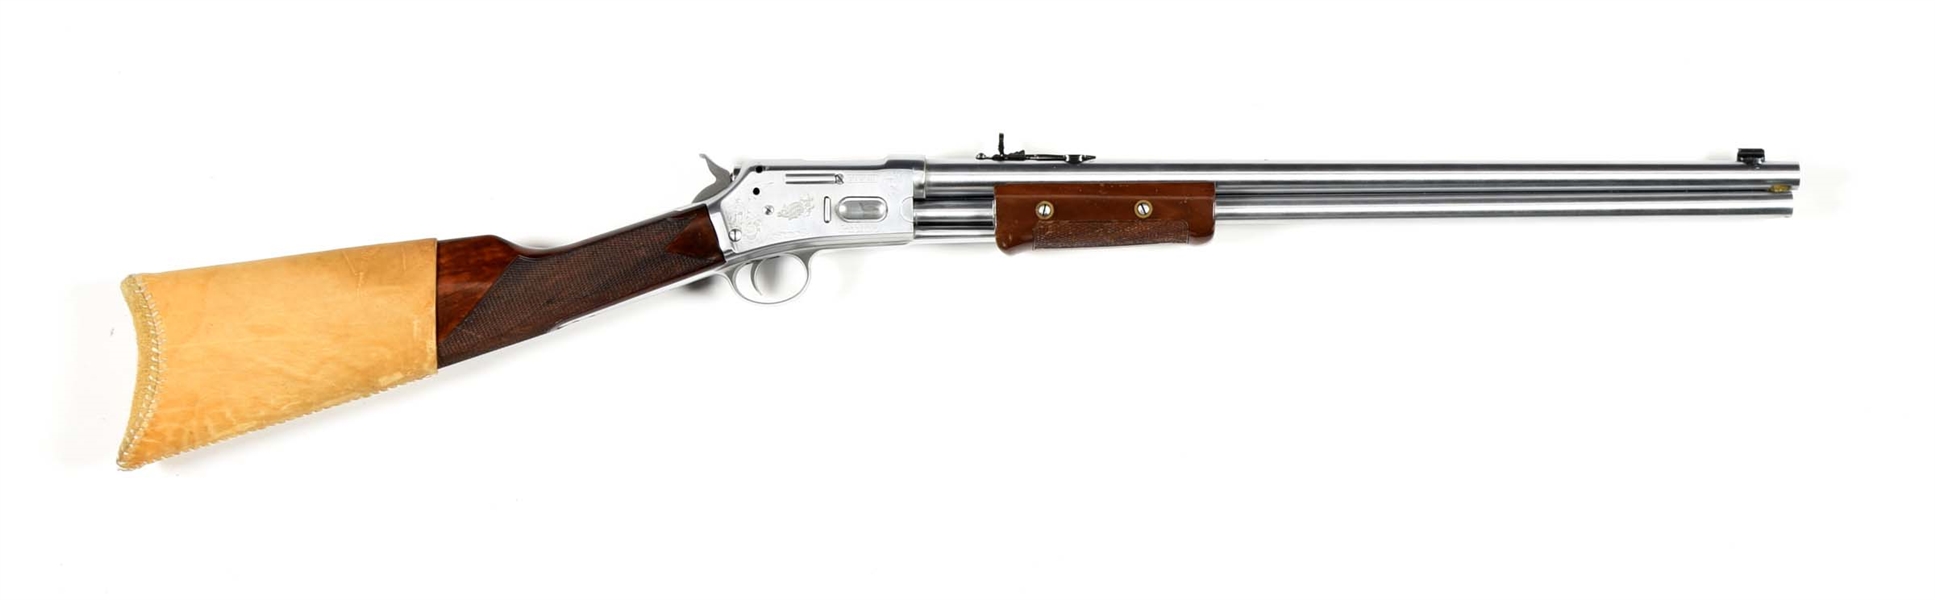 (M) LIMITED EDITION STAINLESS AMERICAN WESTERN ARMS LIGHTNING SLIDE ACTION SHORT RIFLE.